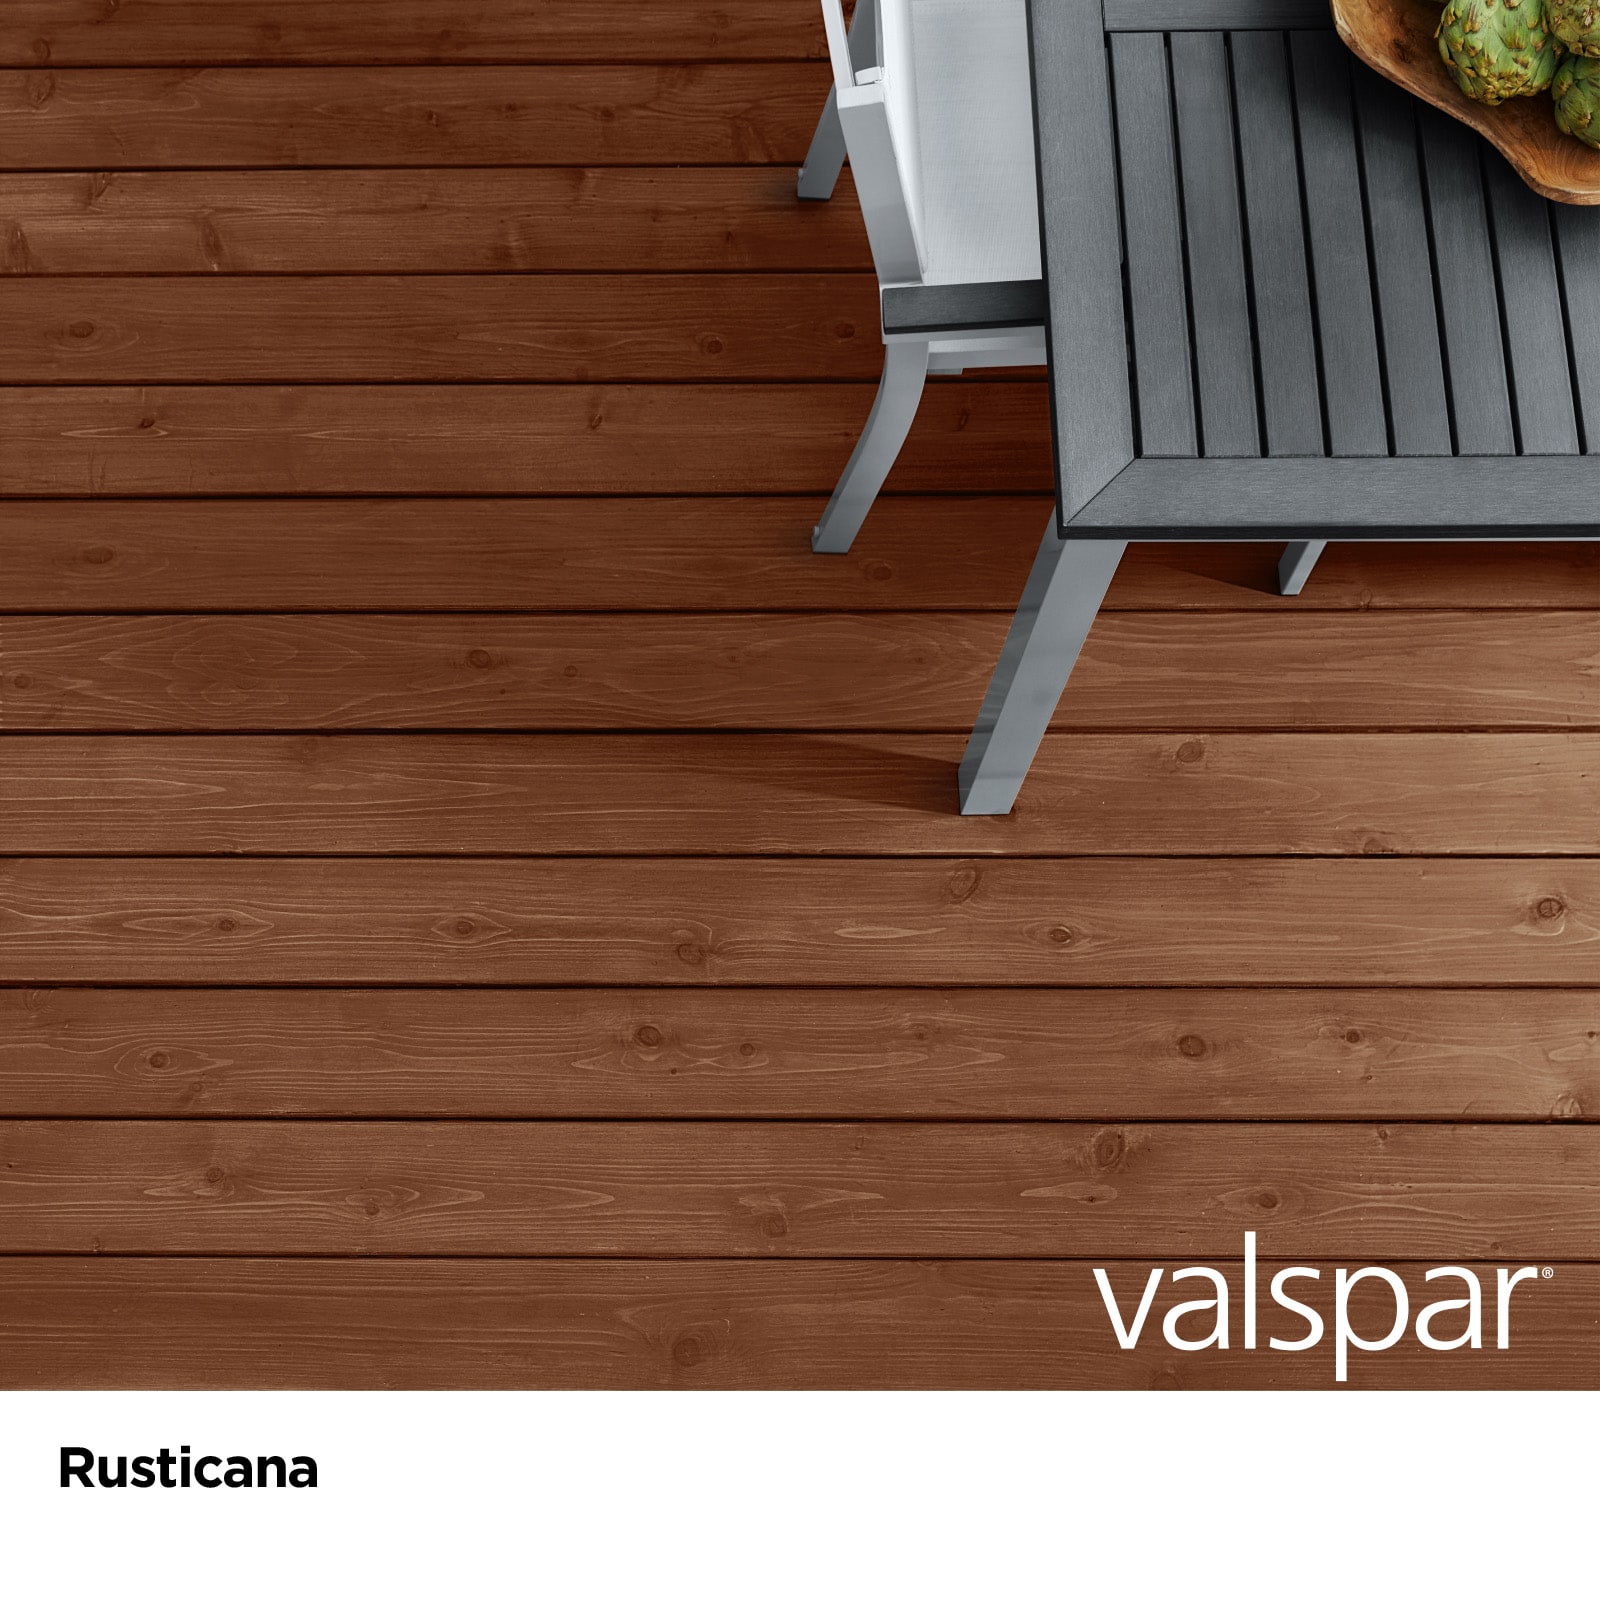 Valspar Darkest Night Semi-transparent Exterior Wood Stain and Sealer  (Half-pint) in the Exterior Stains department at